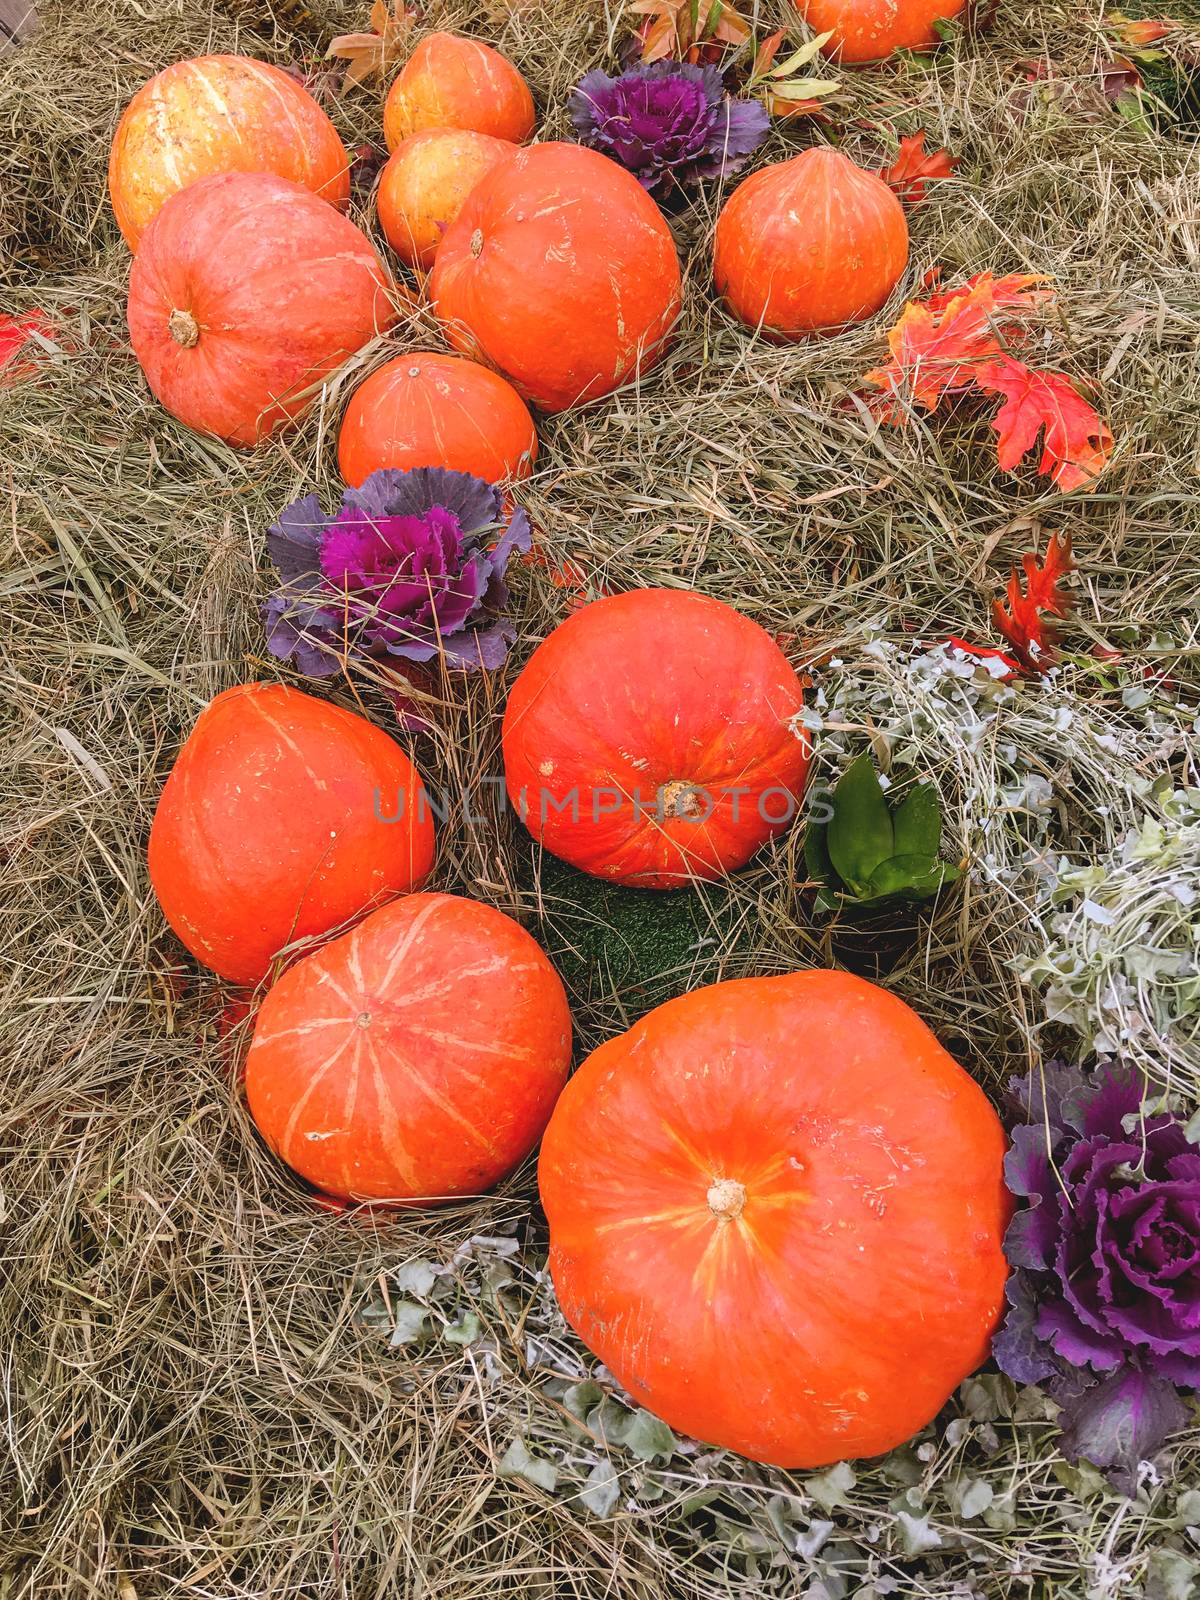 Bright orange pumpkins on straw. Autumn crop. Fall season background with colorful vegetables.